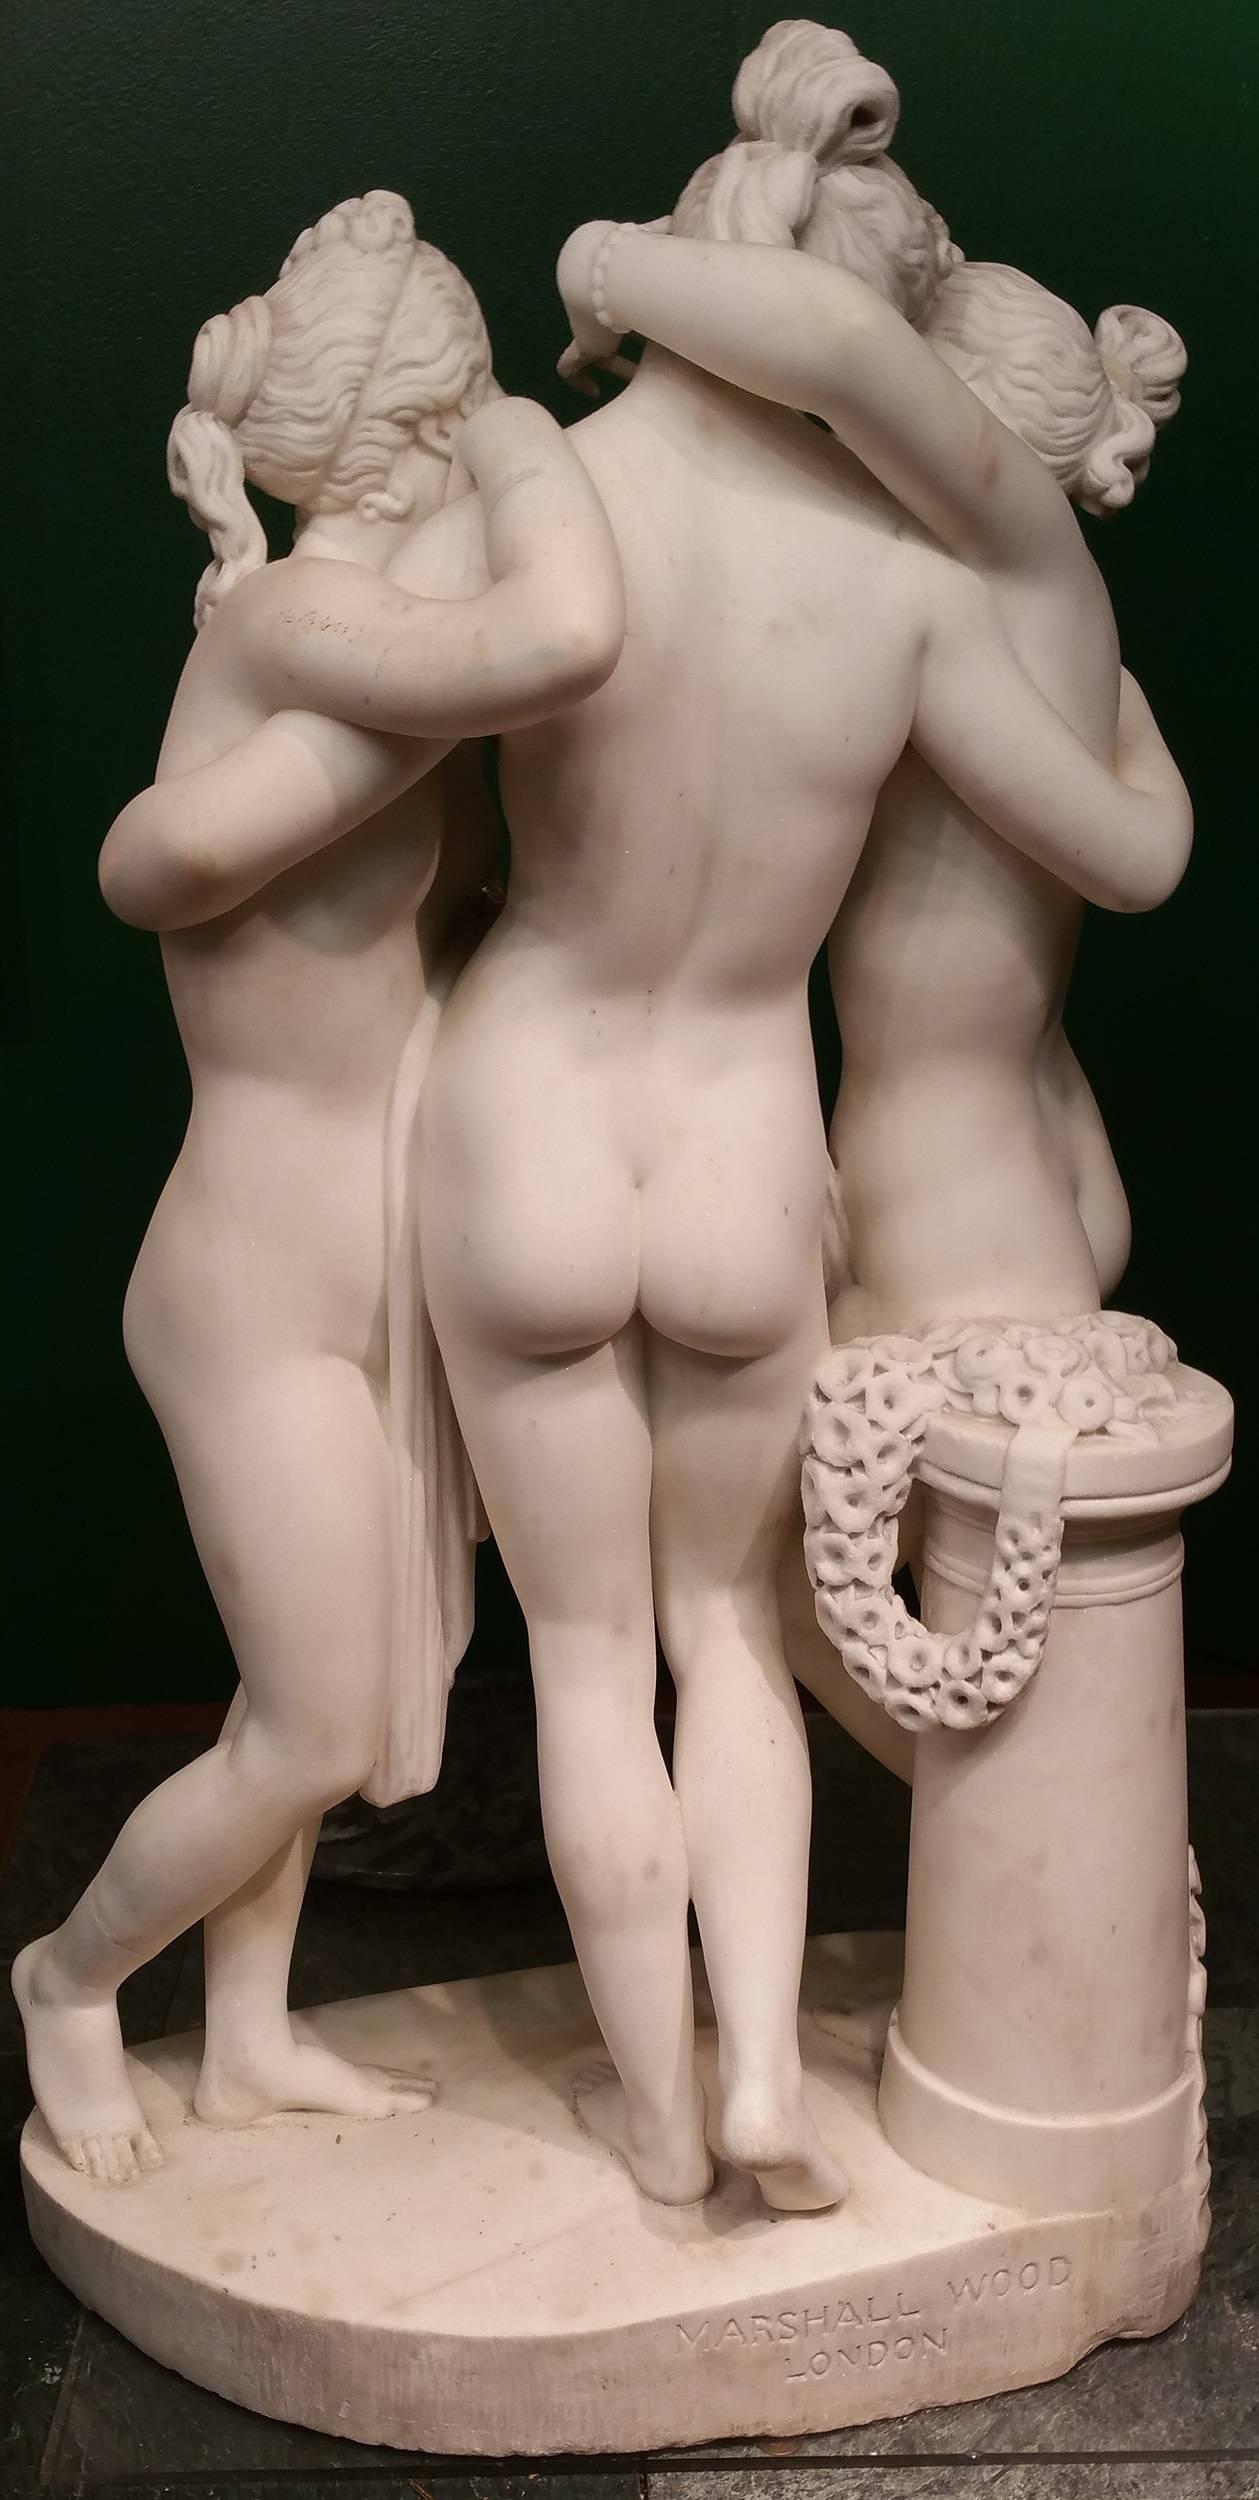 Three Graces - Sculpture by Marshal Wood